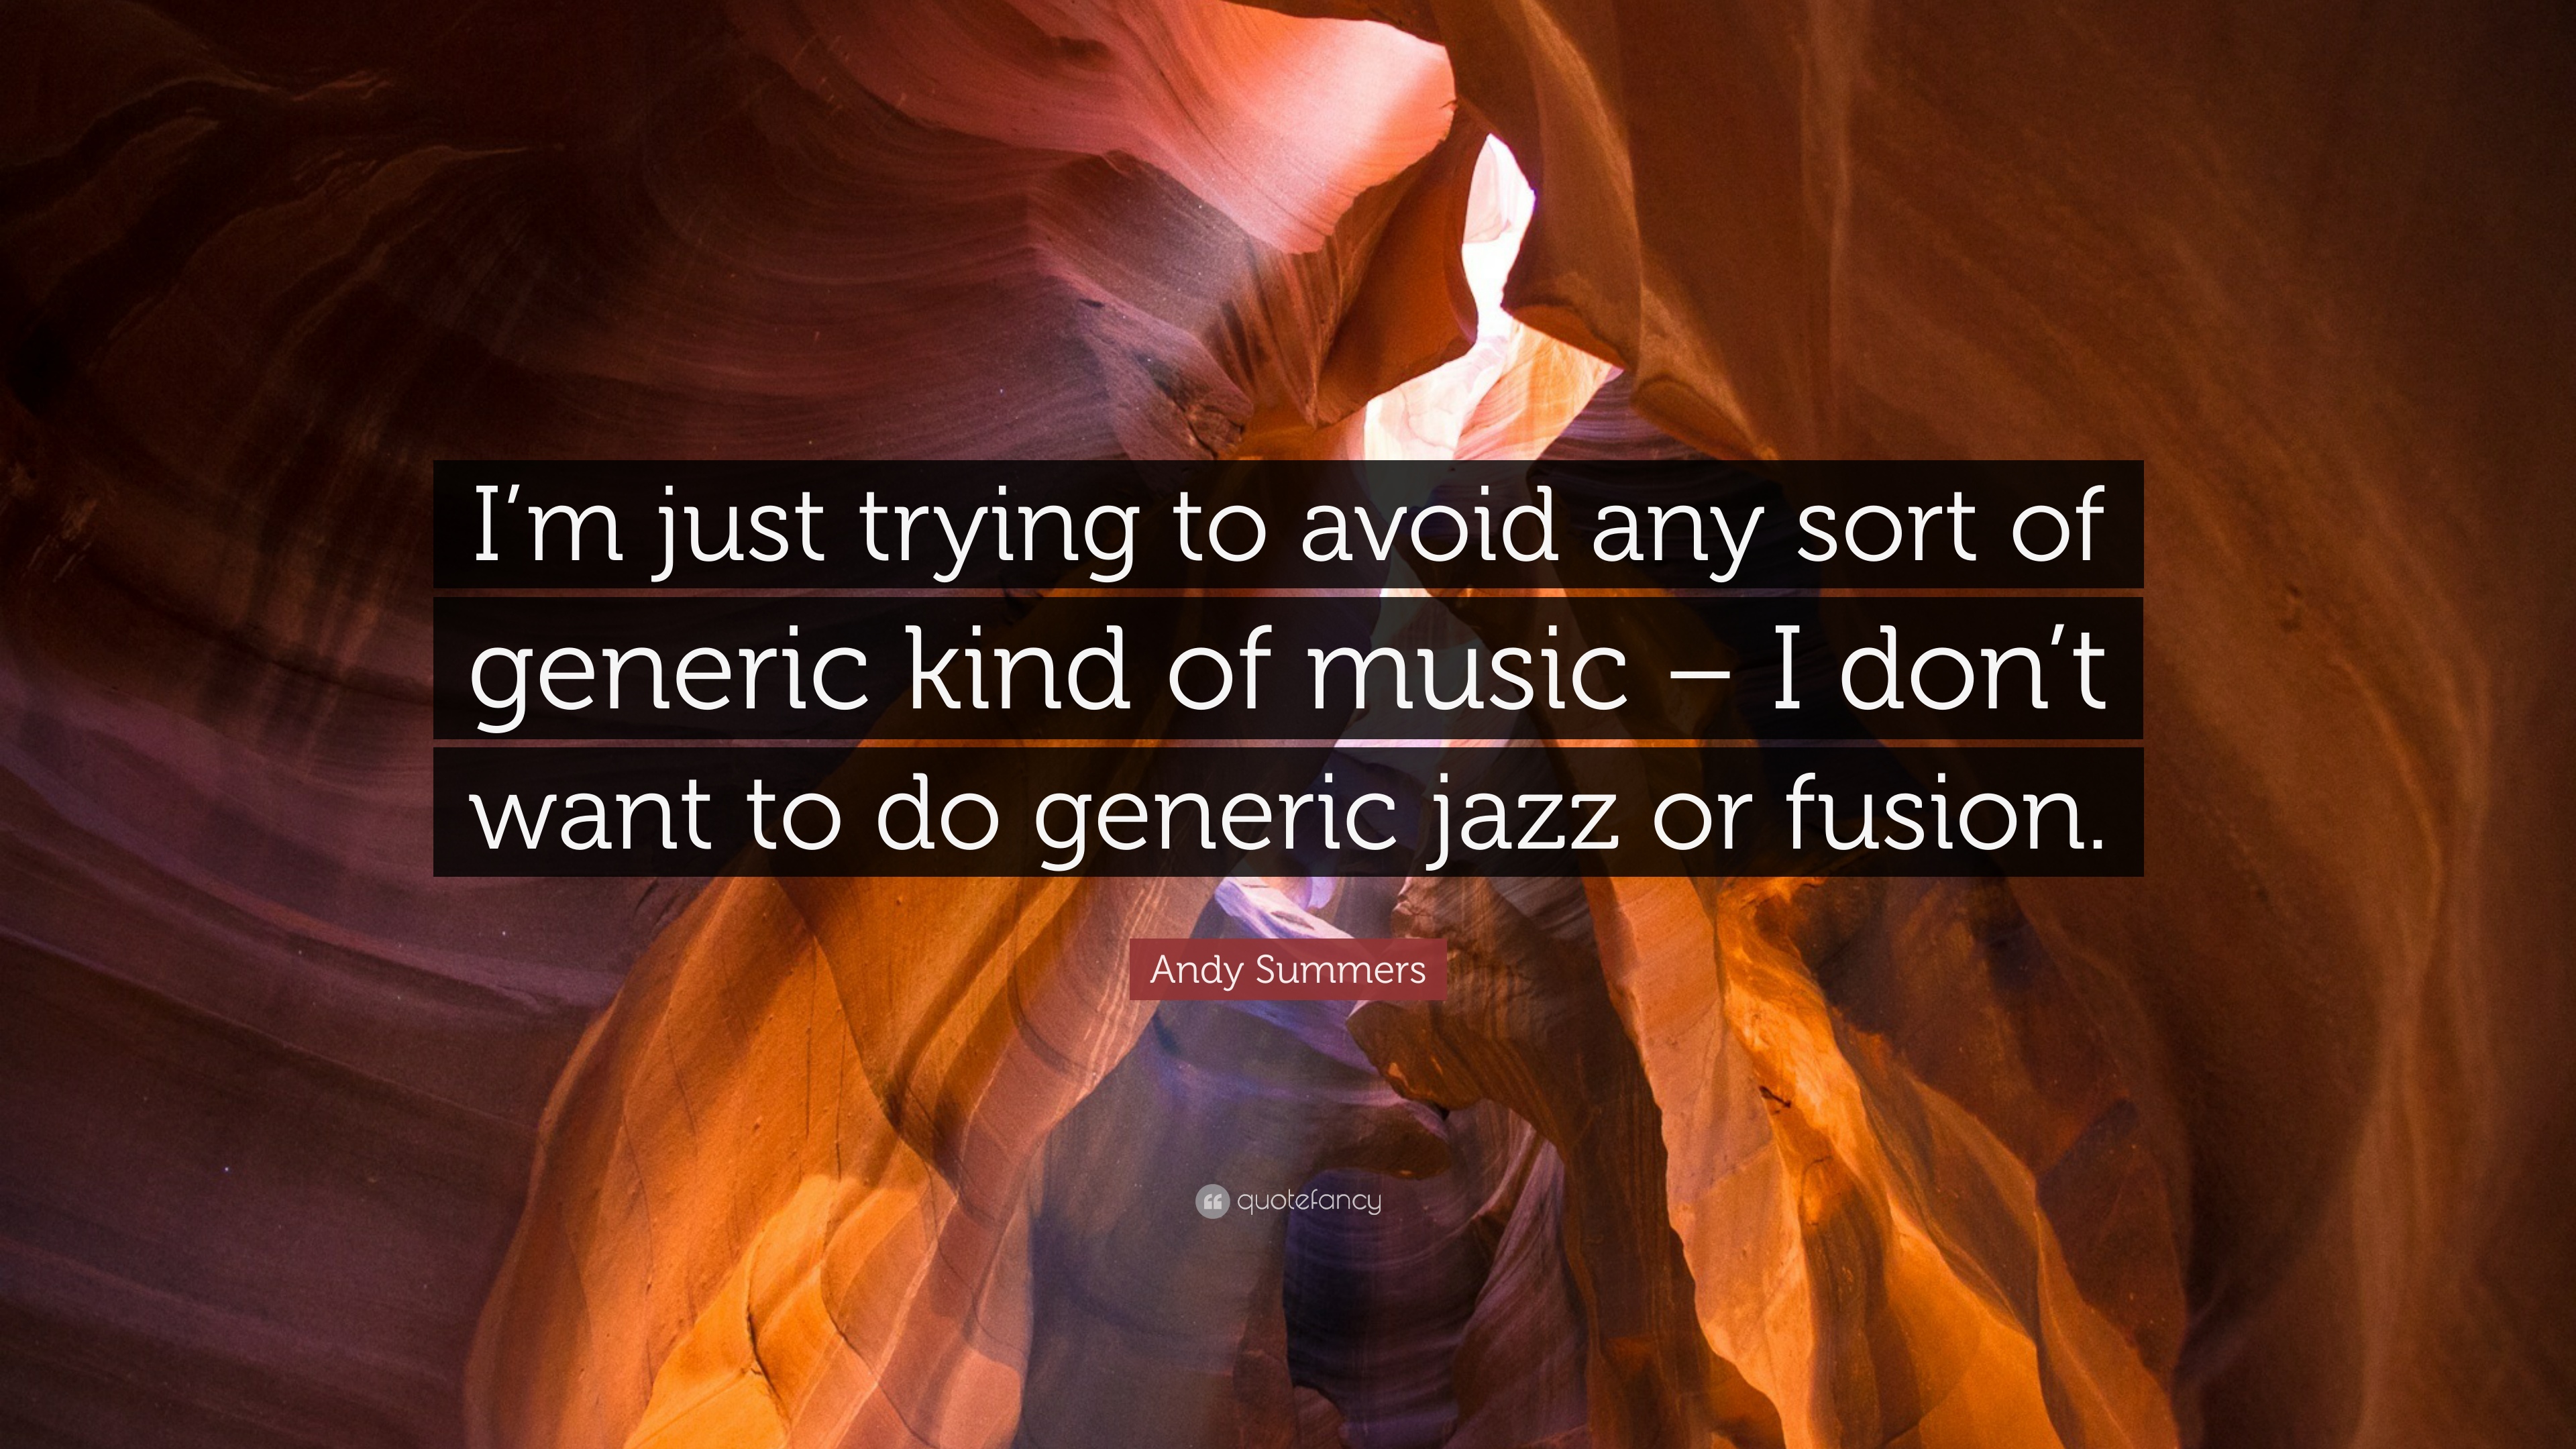 Andy Summers Quote: “I'm just trying to avoid any sort of generic